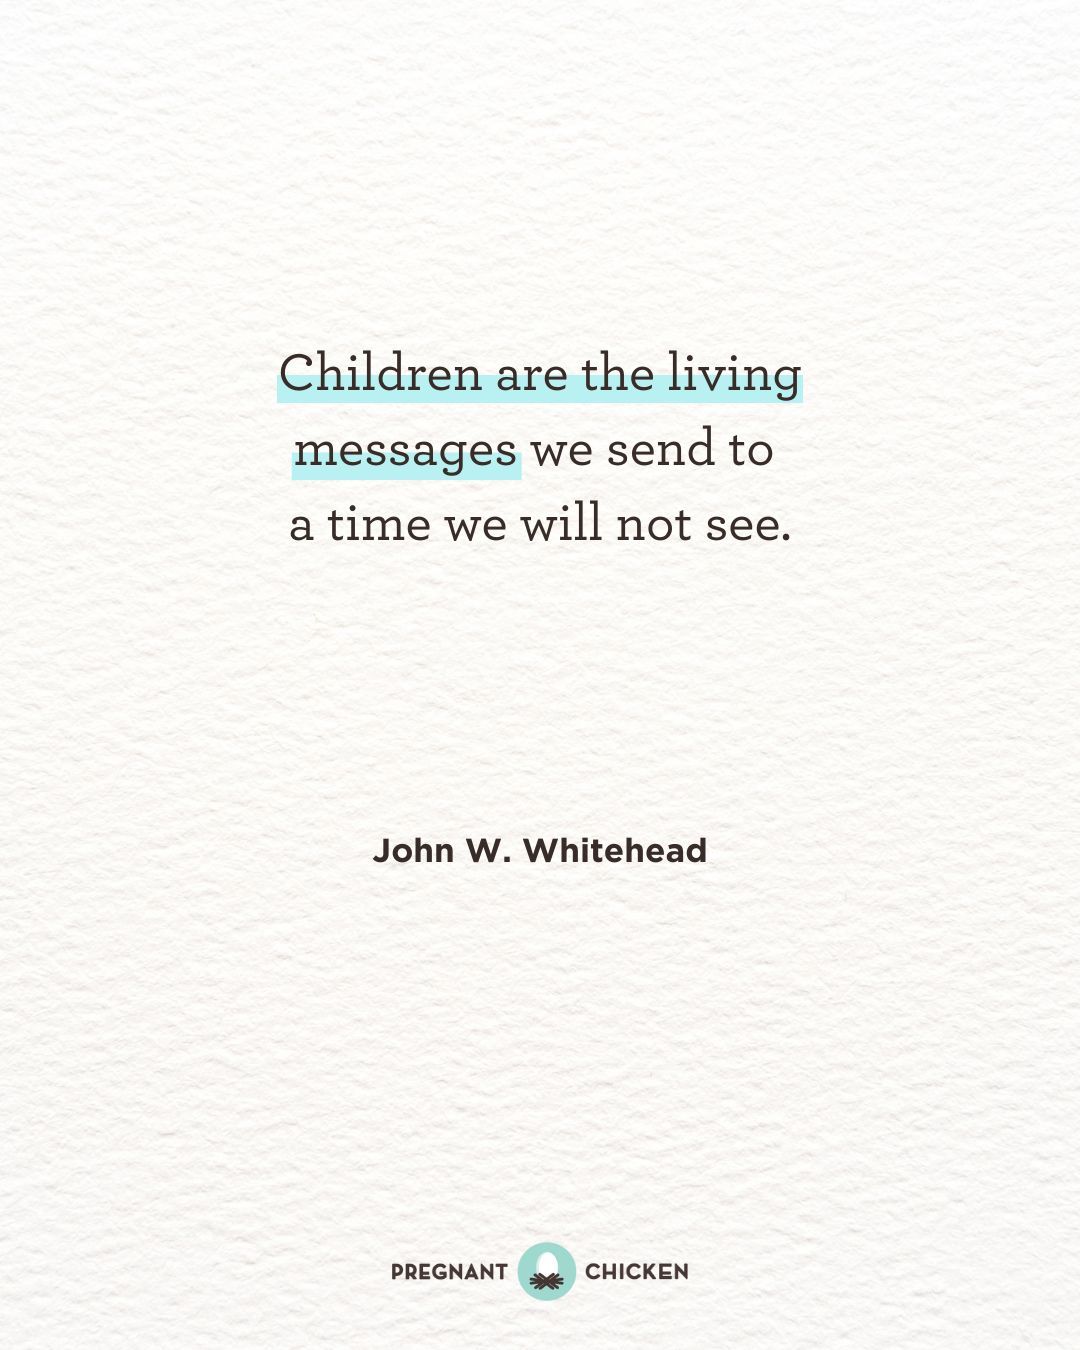 Children are the living messages we send to a time we will not see.